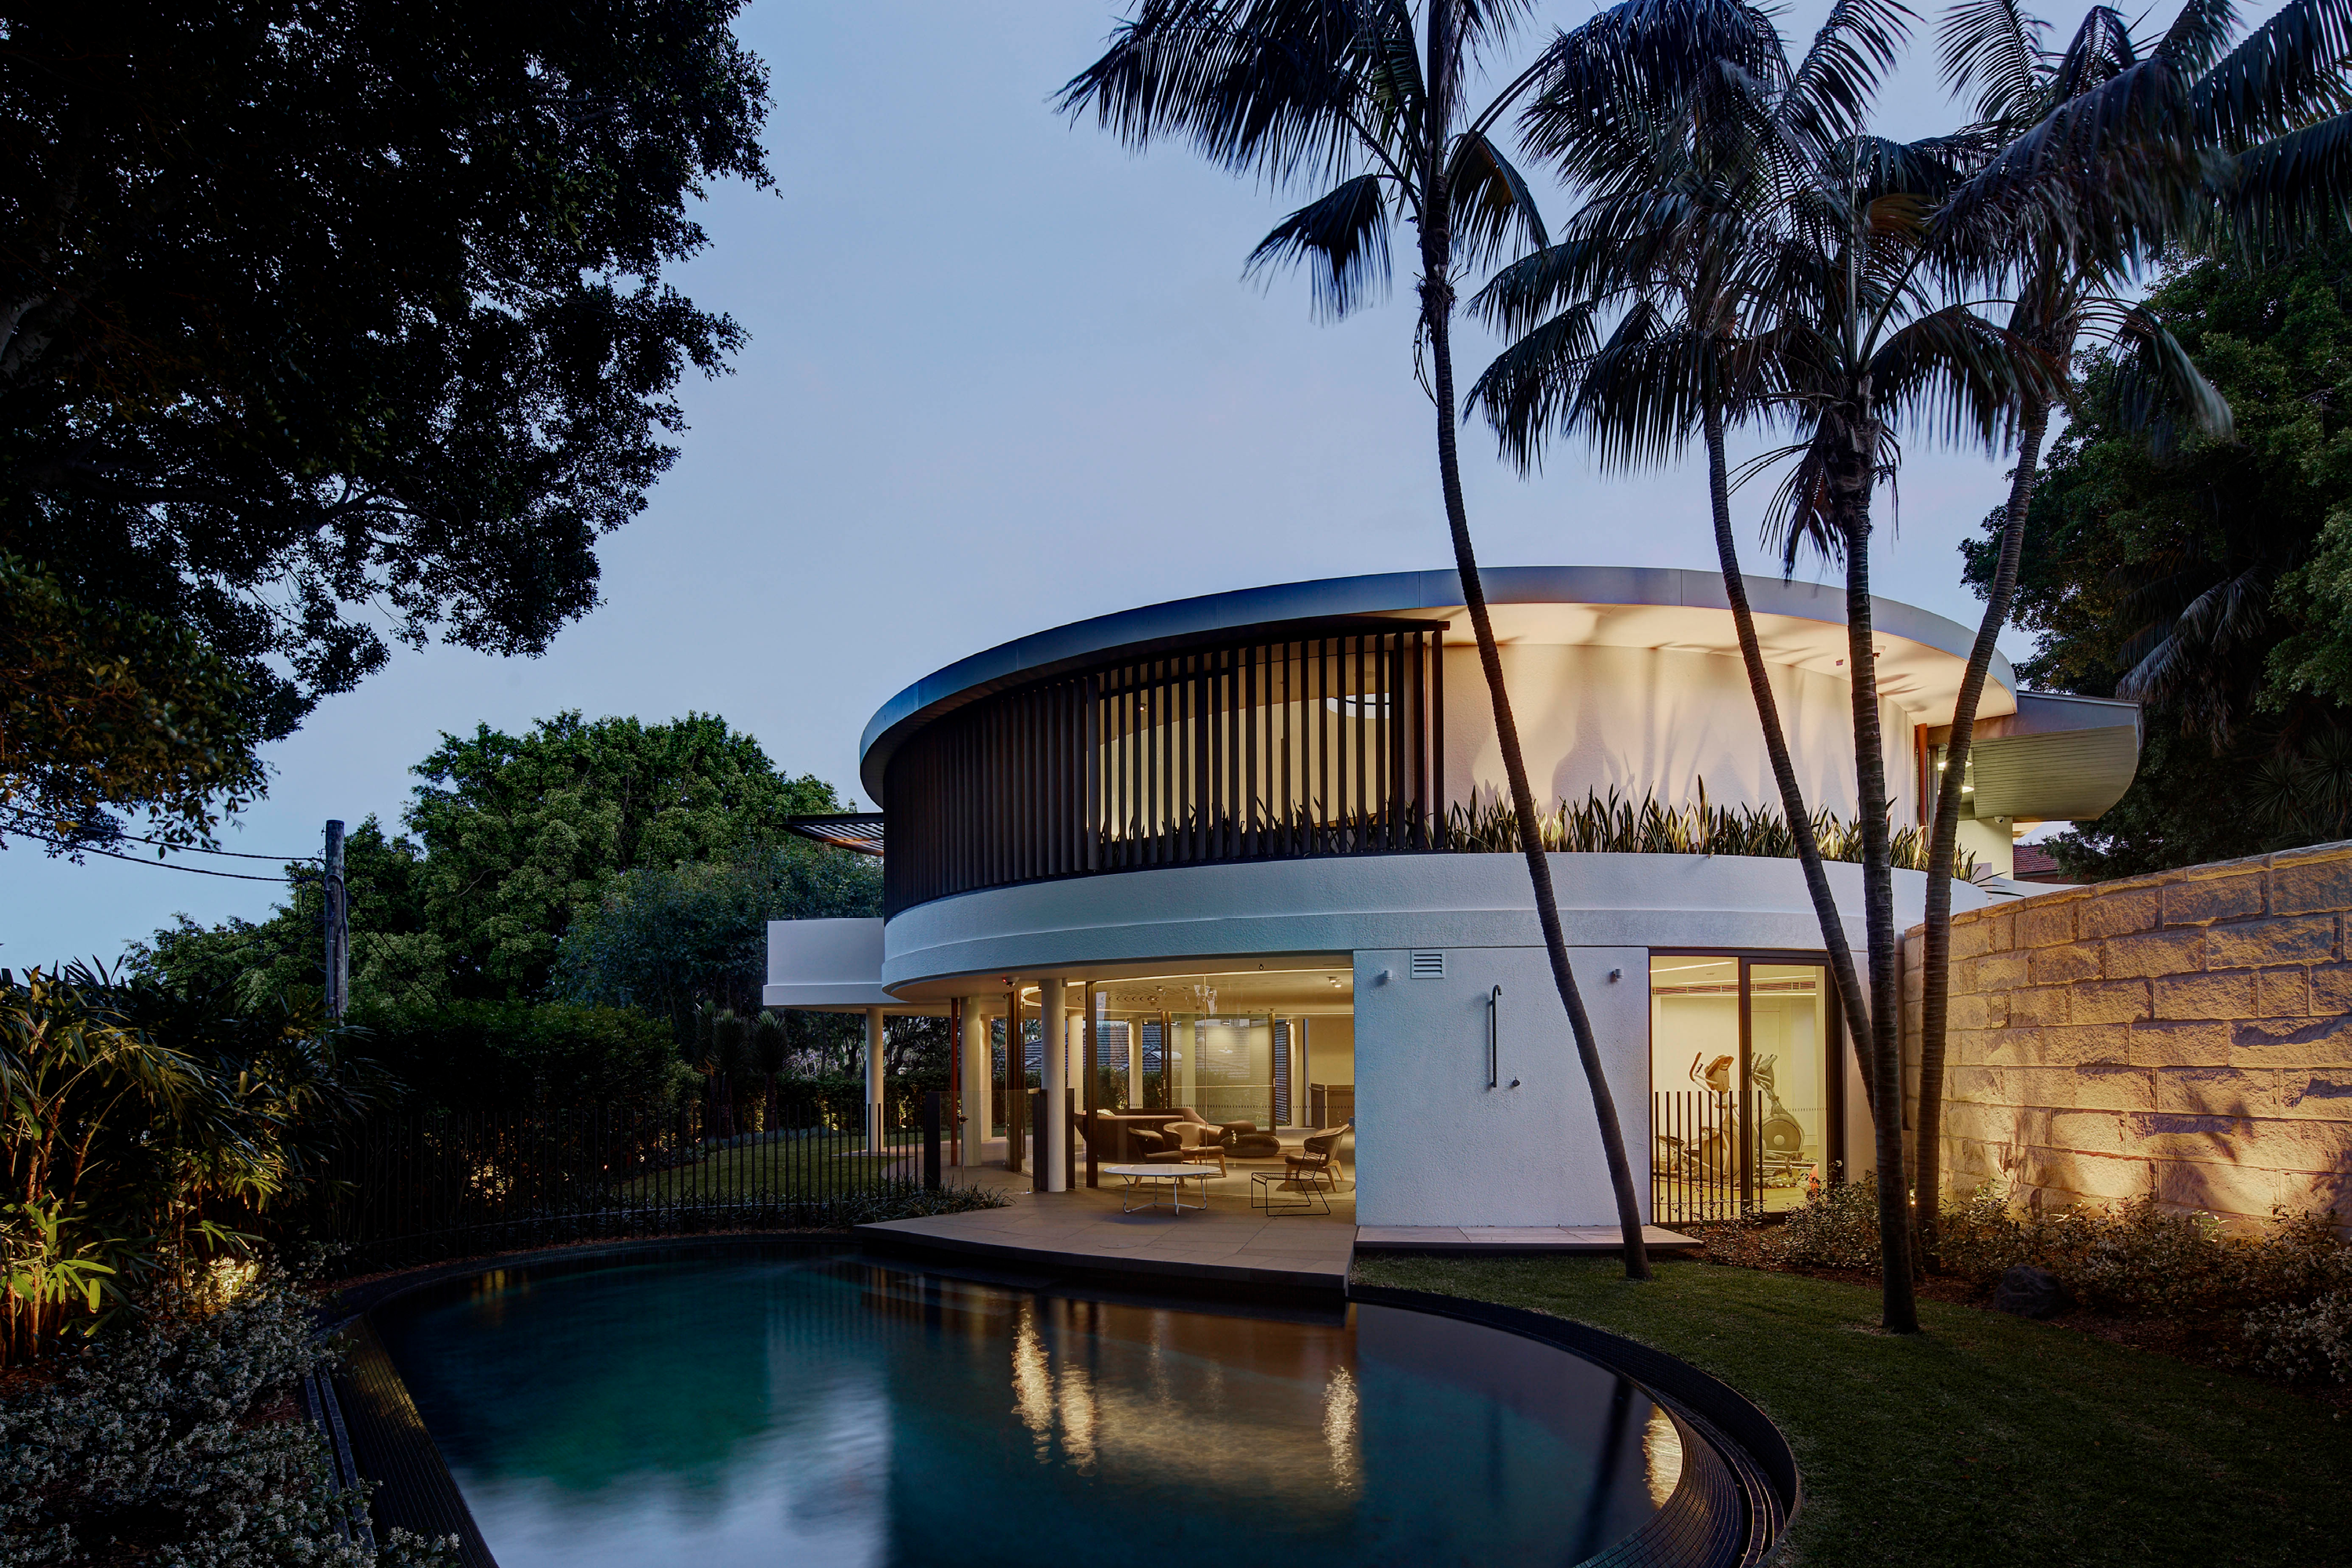 Photograph of the award-wining Bellevue Hill Residence designed by Tzannes